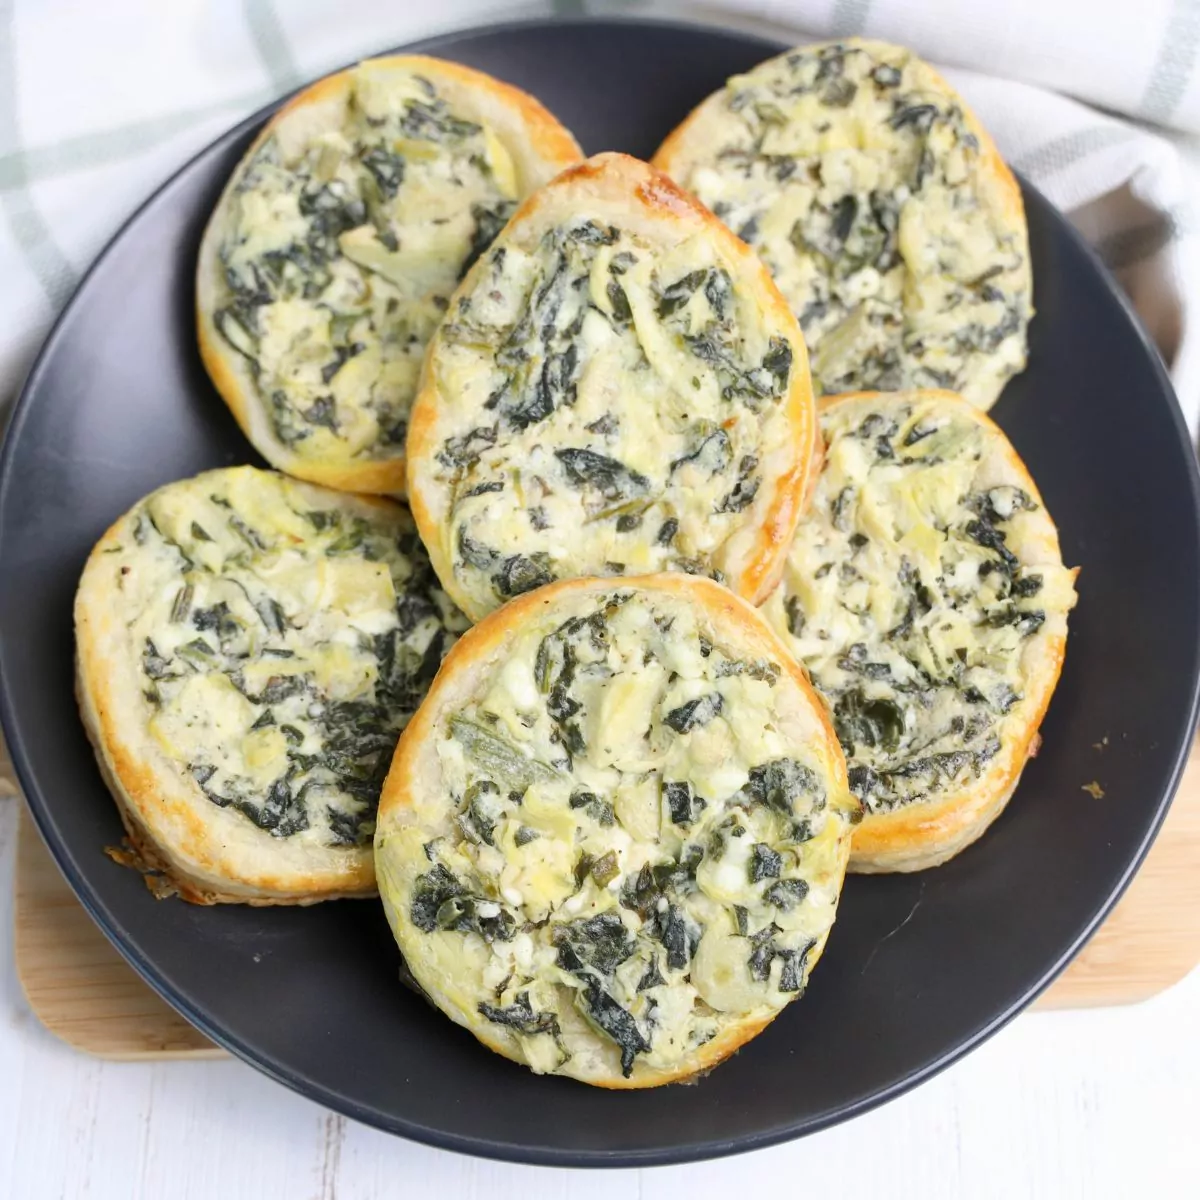 Egg shaped Spinach Artichoke Puff Pastries on a black plate.